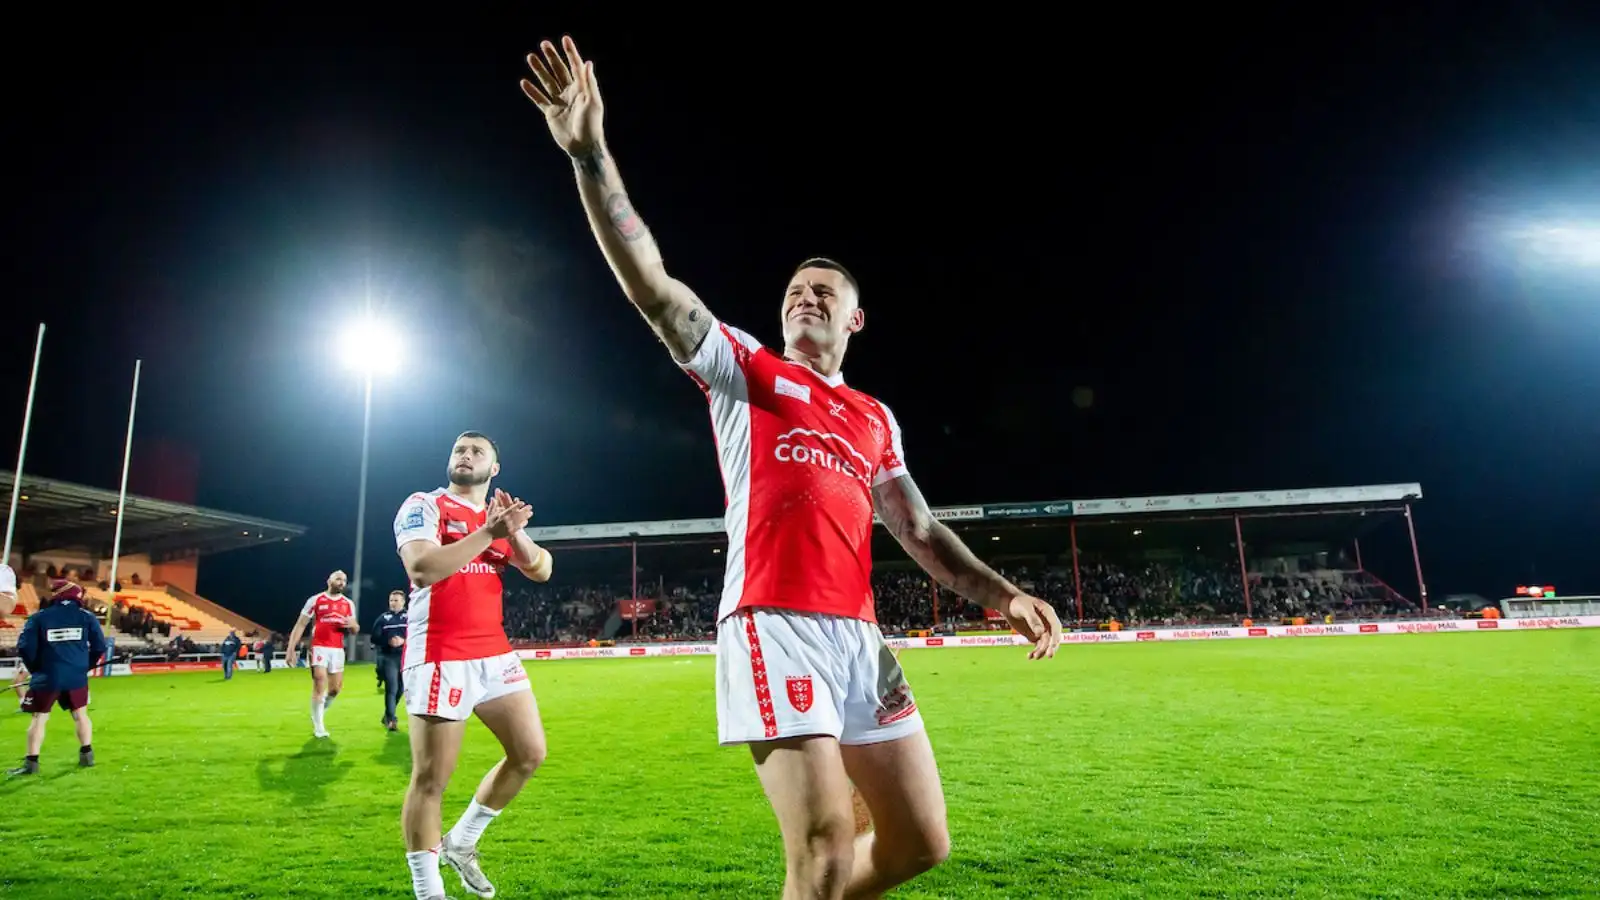 Shaun Kenny-Dowall: Hull KR captain shares Wembley dream with ‘every kid’ but won’t make Challenge Cup semi-final about himself with retirement in near future